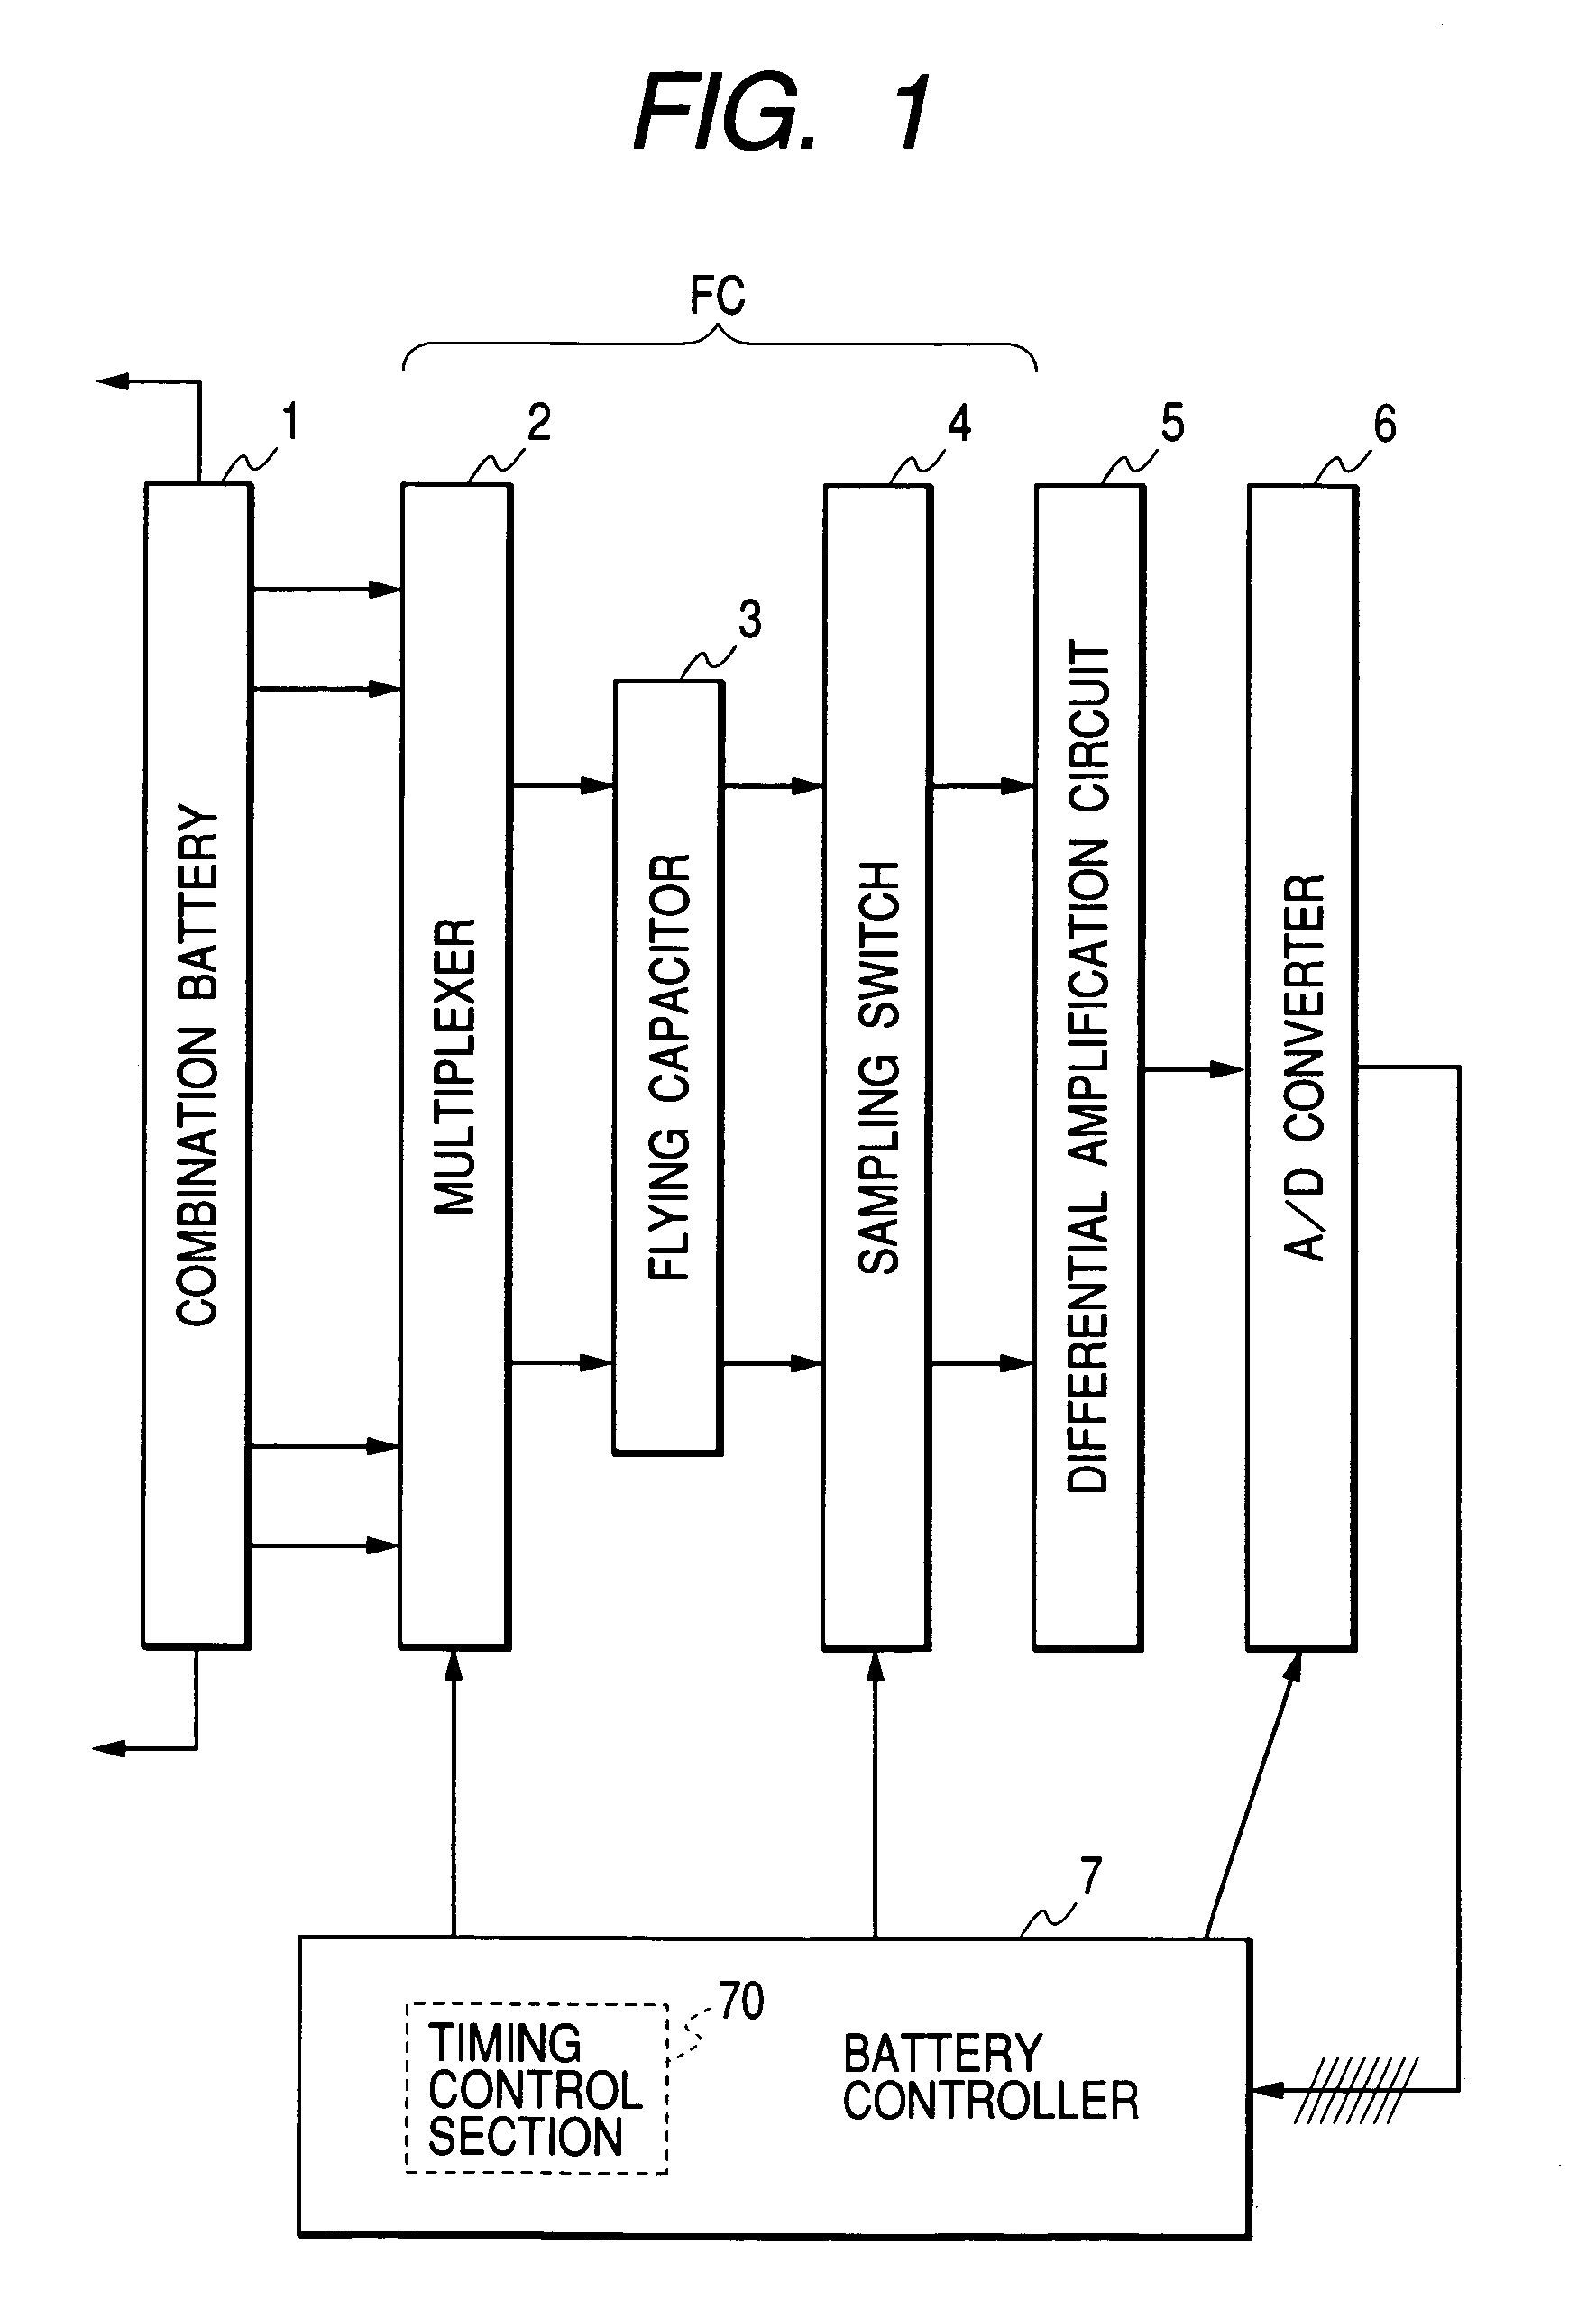 Voltage detecting apparatus applicable to a combination battery